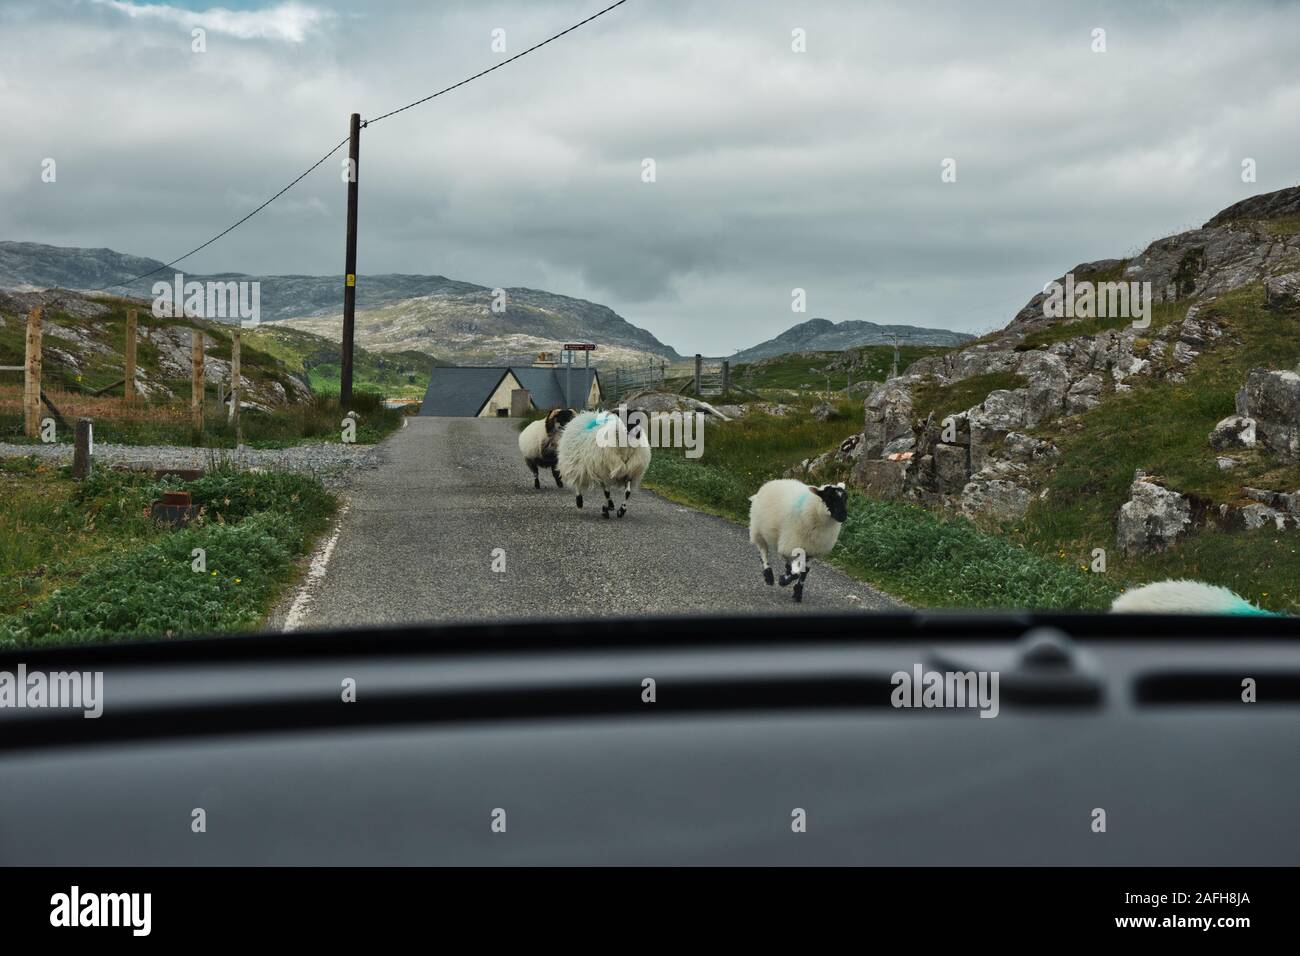 Sheep walking on single track road seen through car windscreen, Isle of Lewis and Harris, Outer Hebrides, Scotland Stock Photo